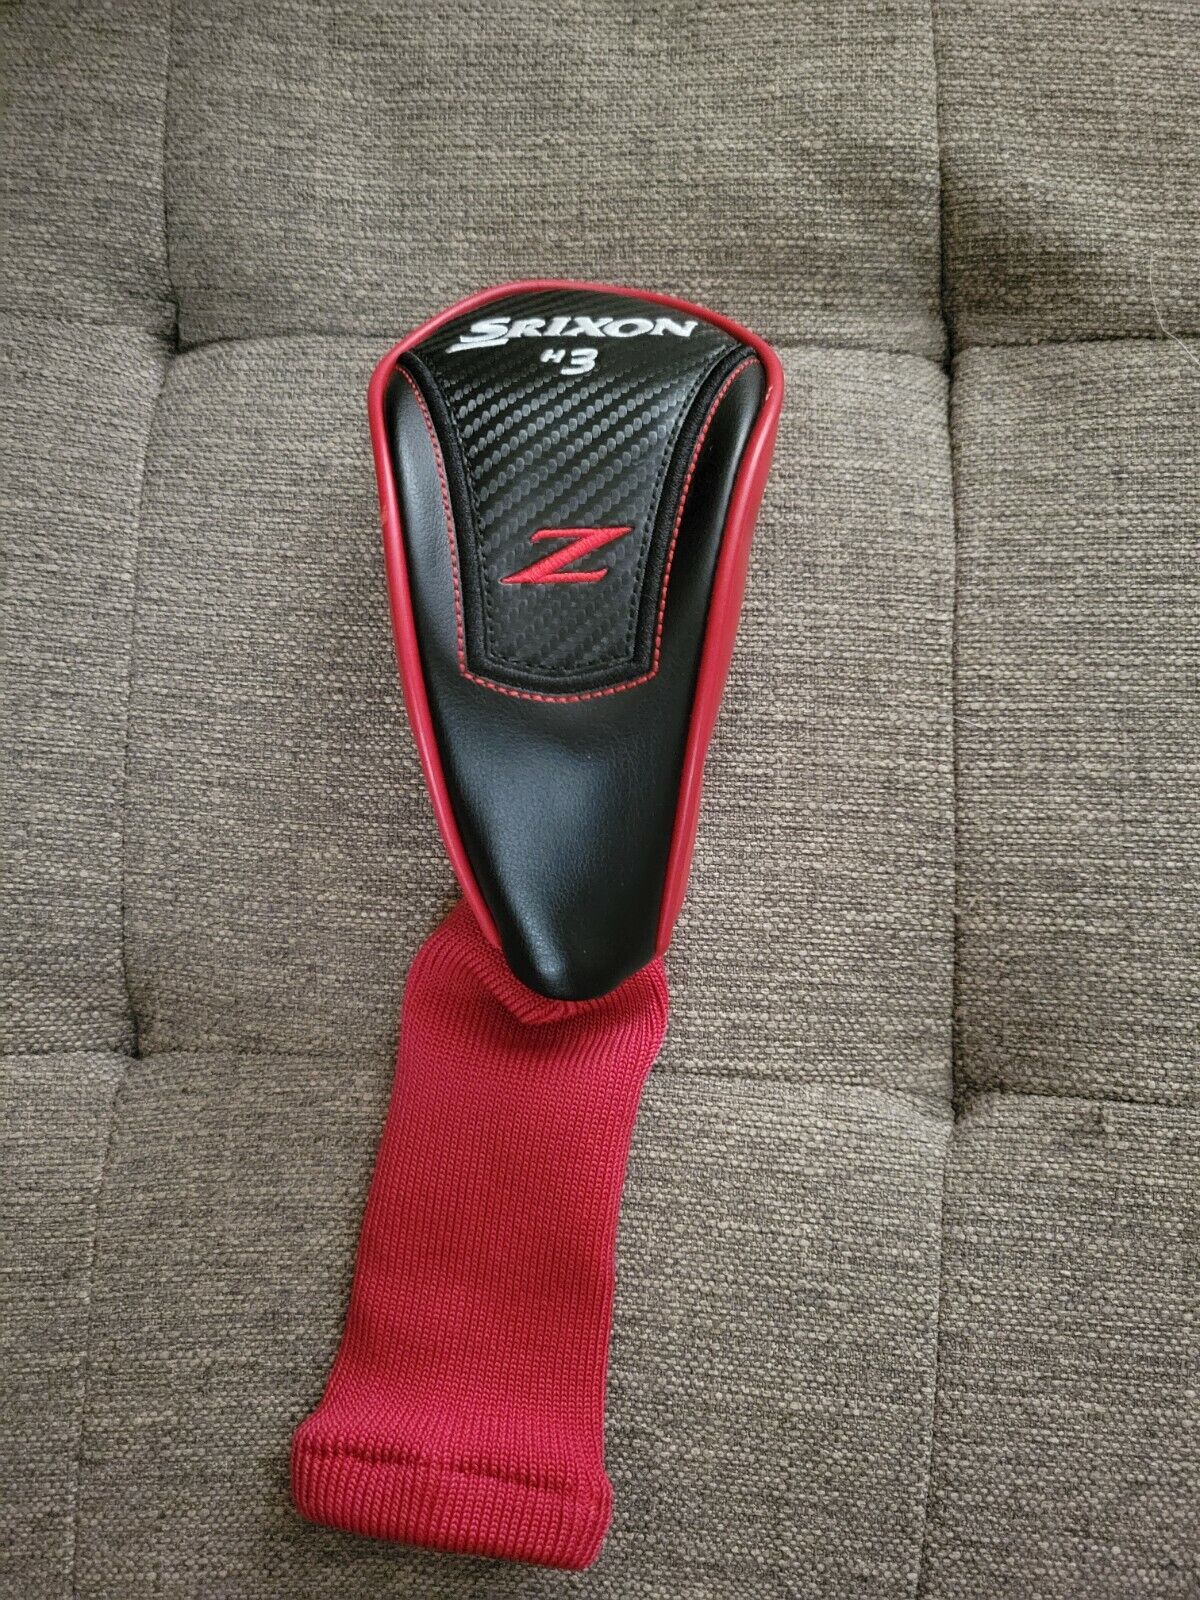 Srixon Z #3H Hybrid/Iron Headcover, Mint Condition Red/Black Golf Head Cover